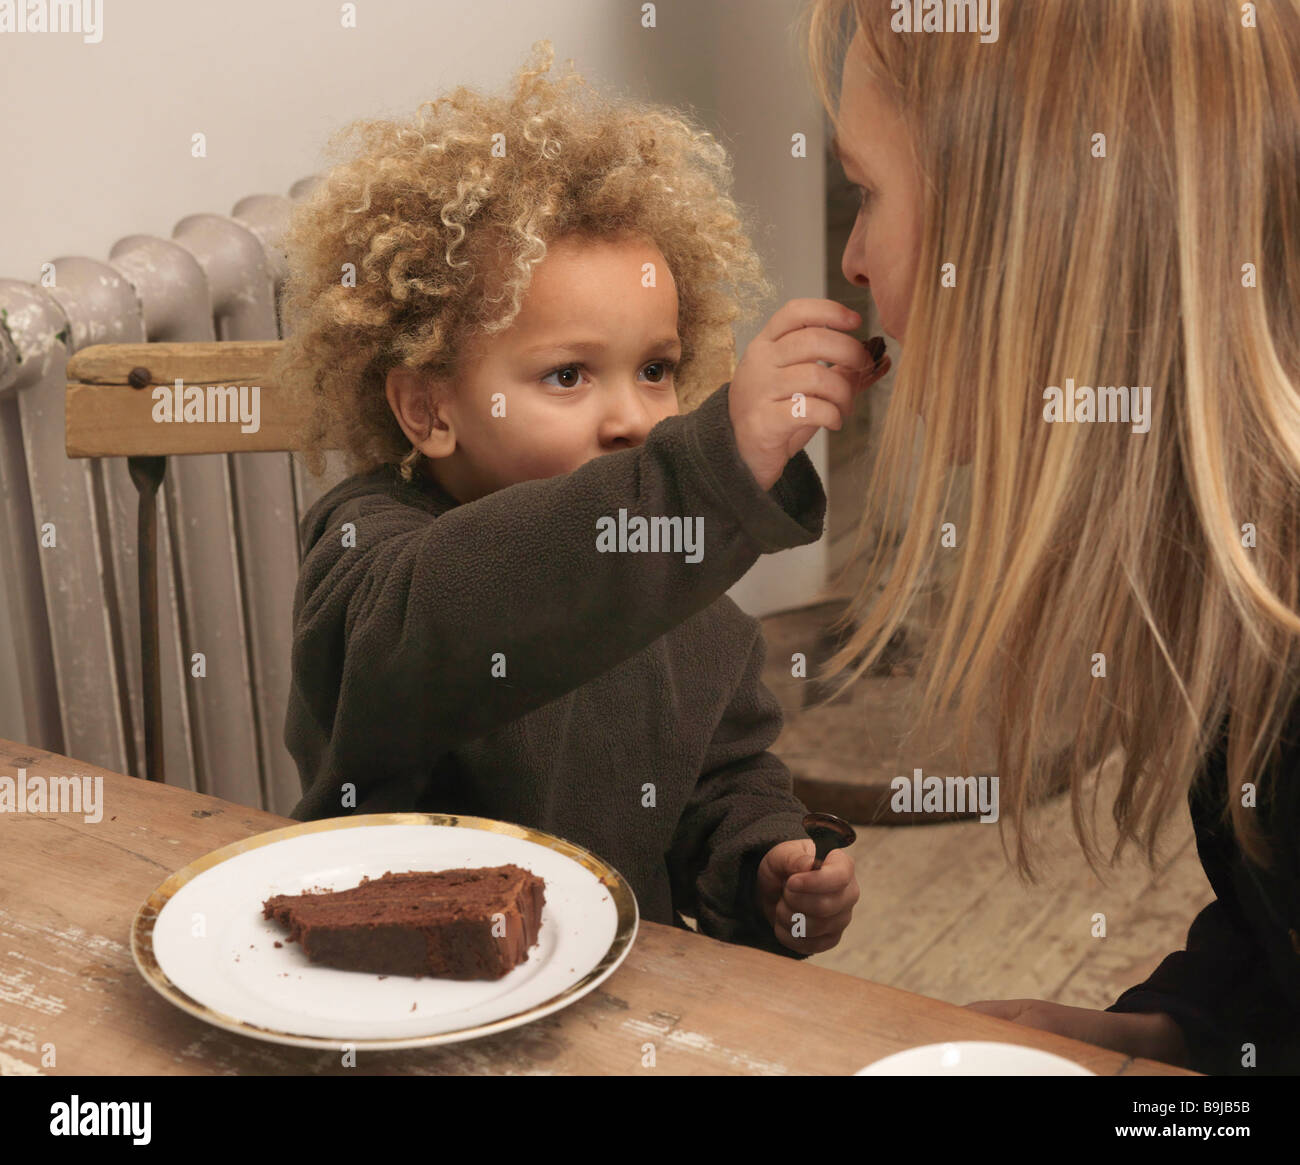 Young boy feeding cake to mother Stock Photo